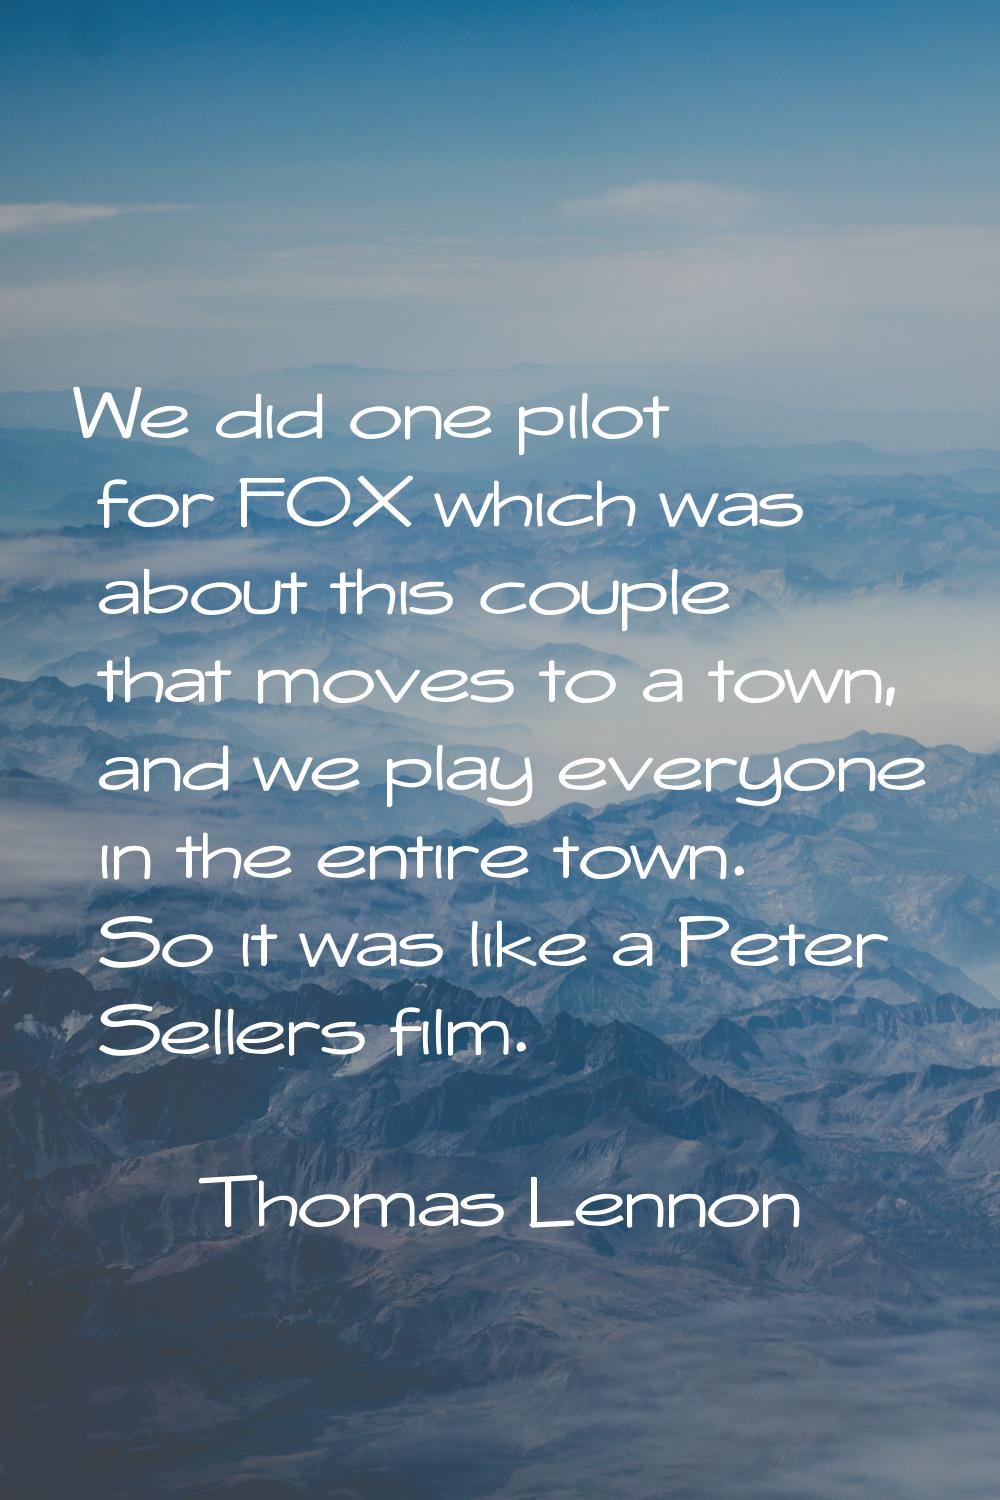 We did one pilot for FOX which was about this couple that moves to a town, and we play everyone in 